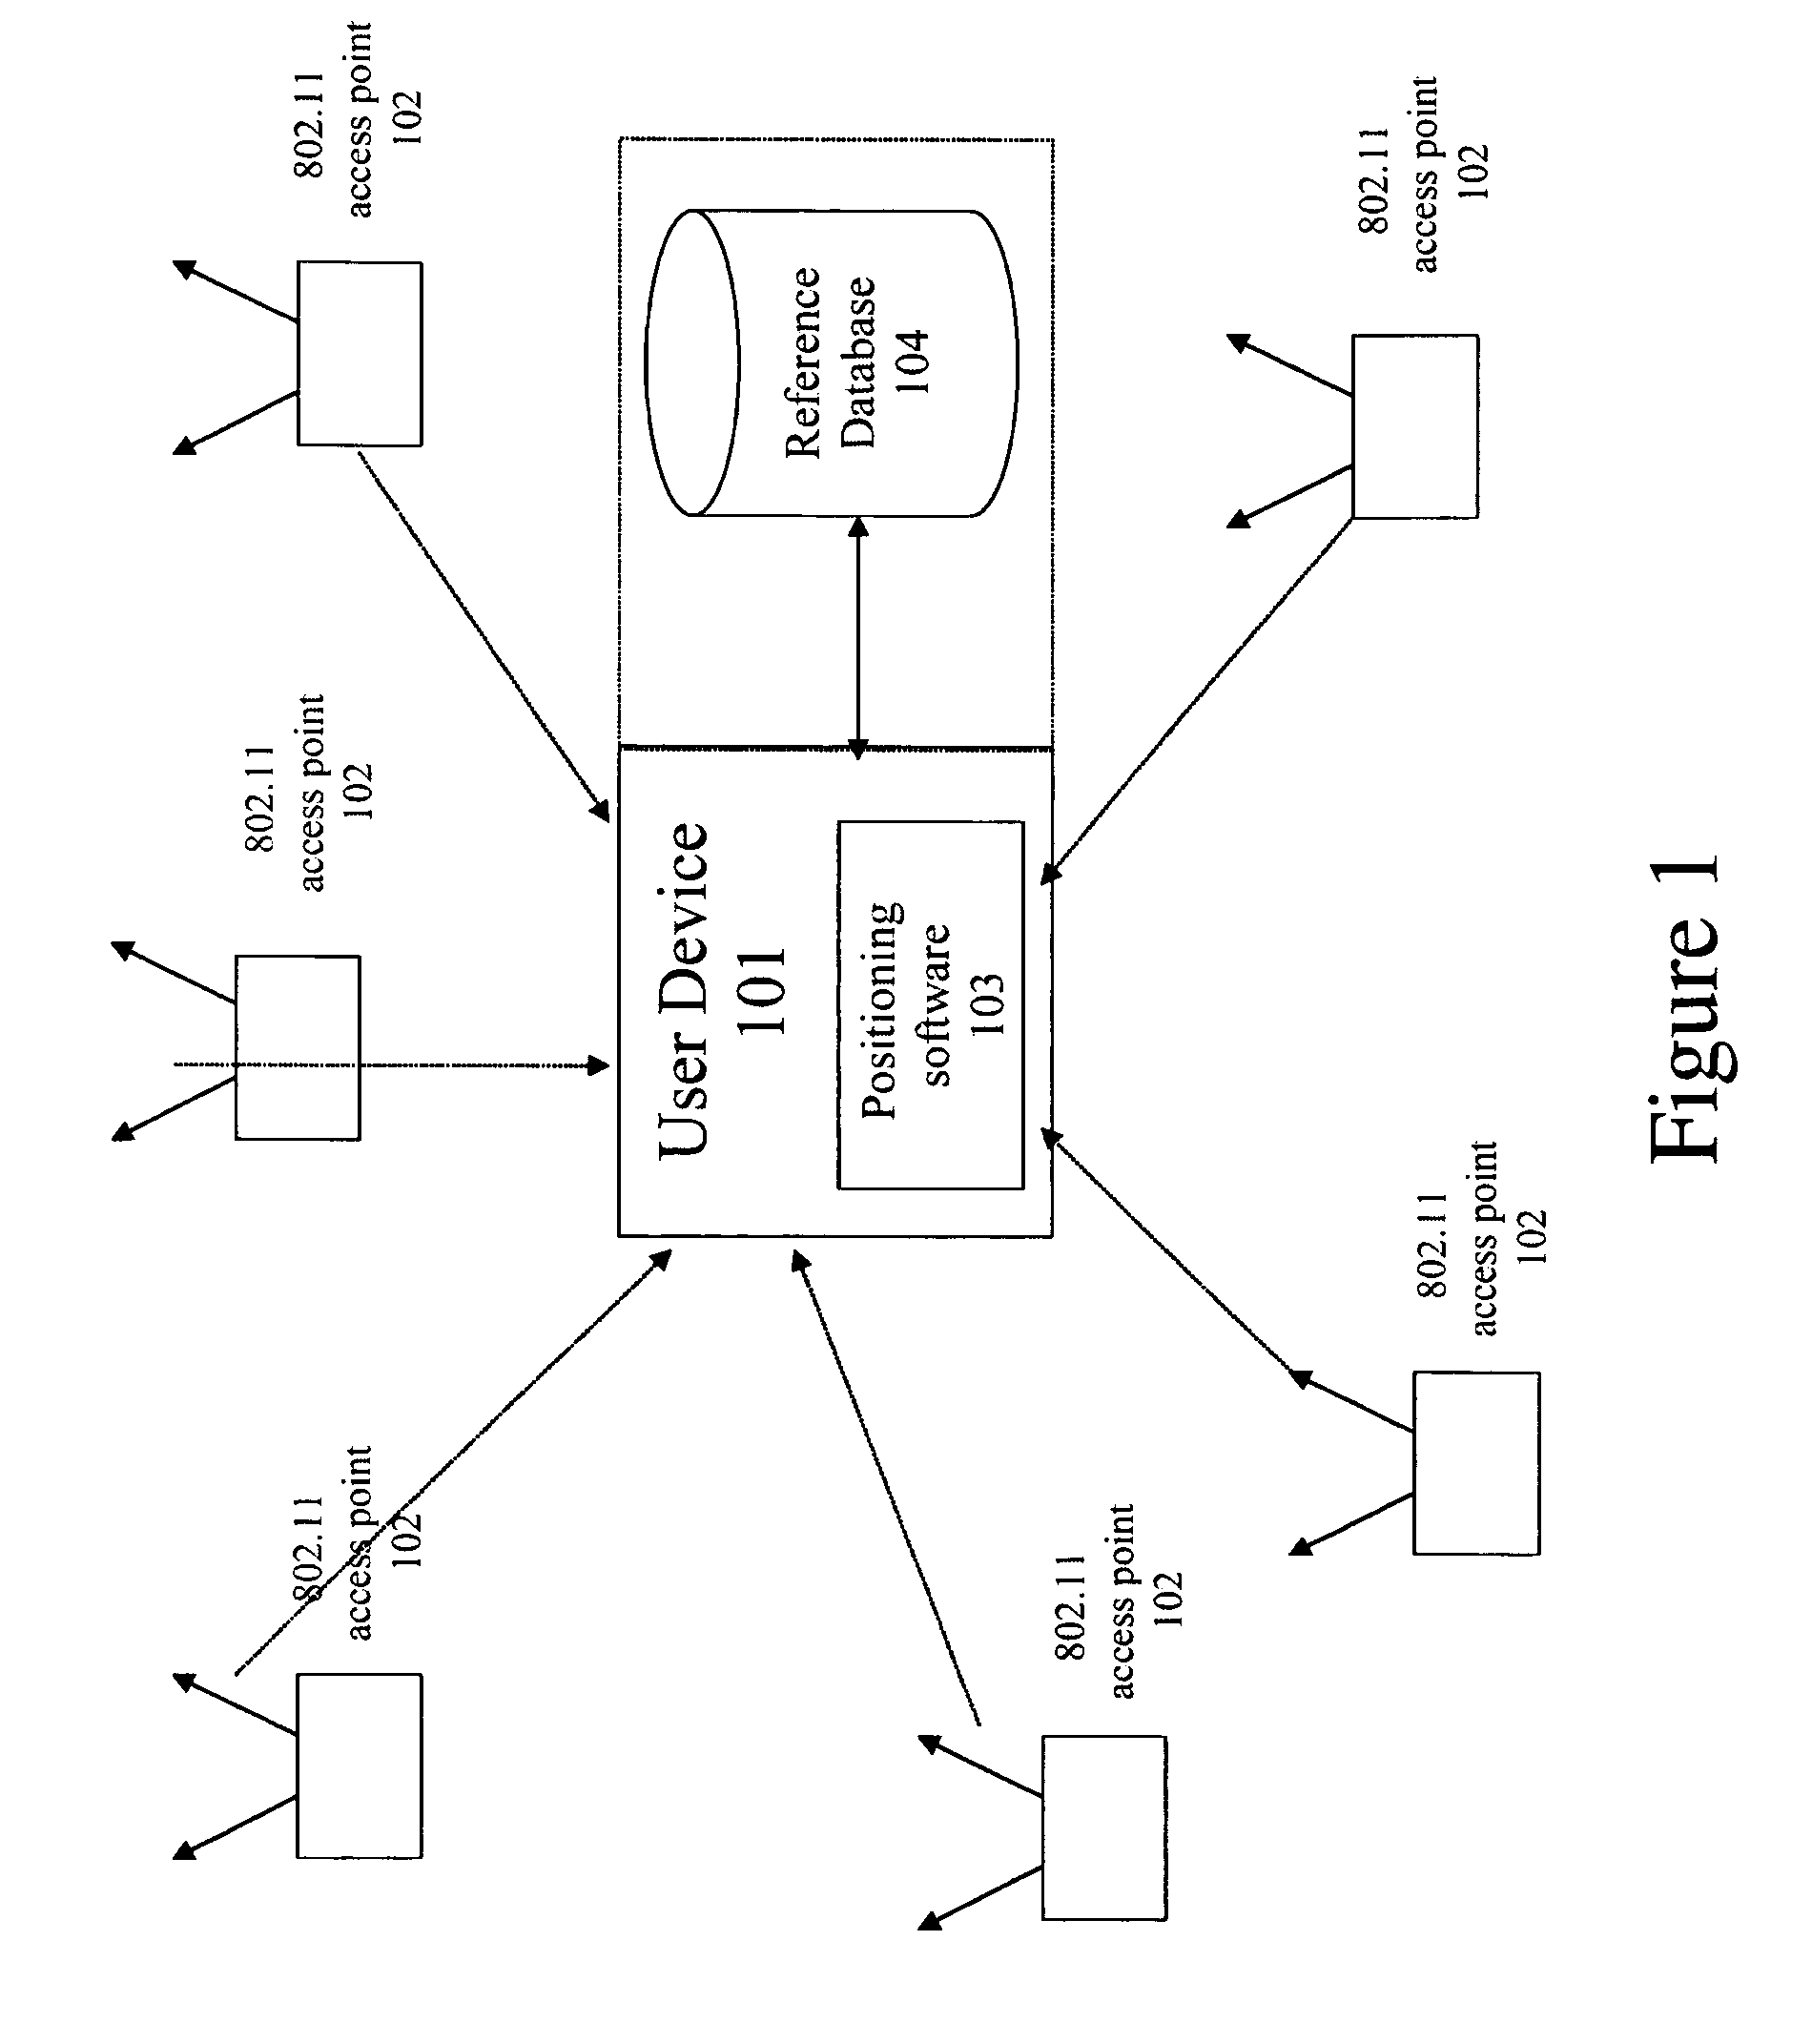 Estimation of position using WLAN access point radio propagation characteristics in a WLAN positioning system